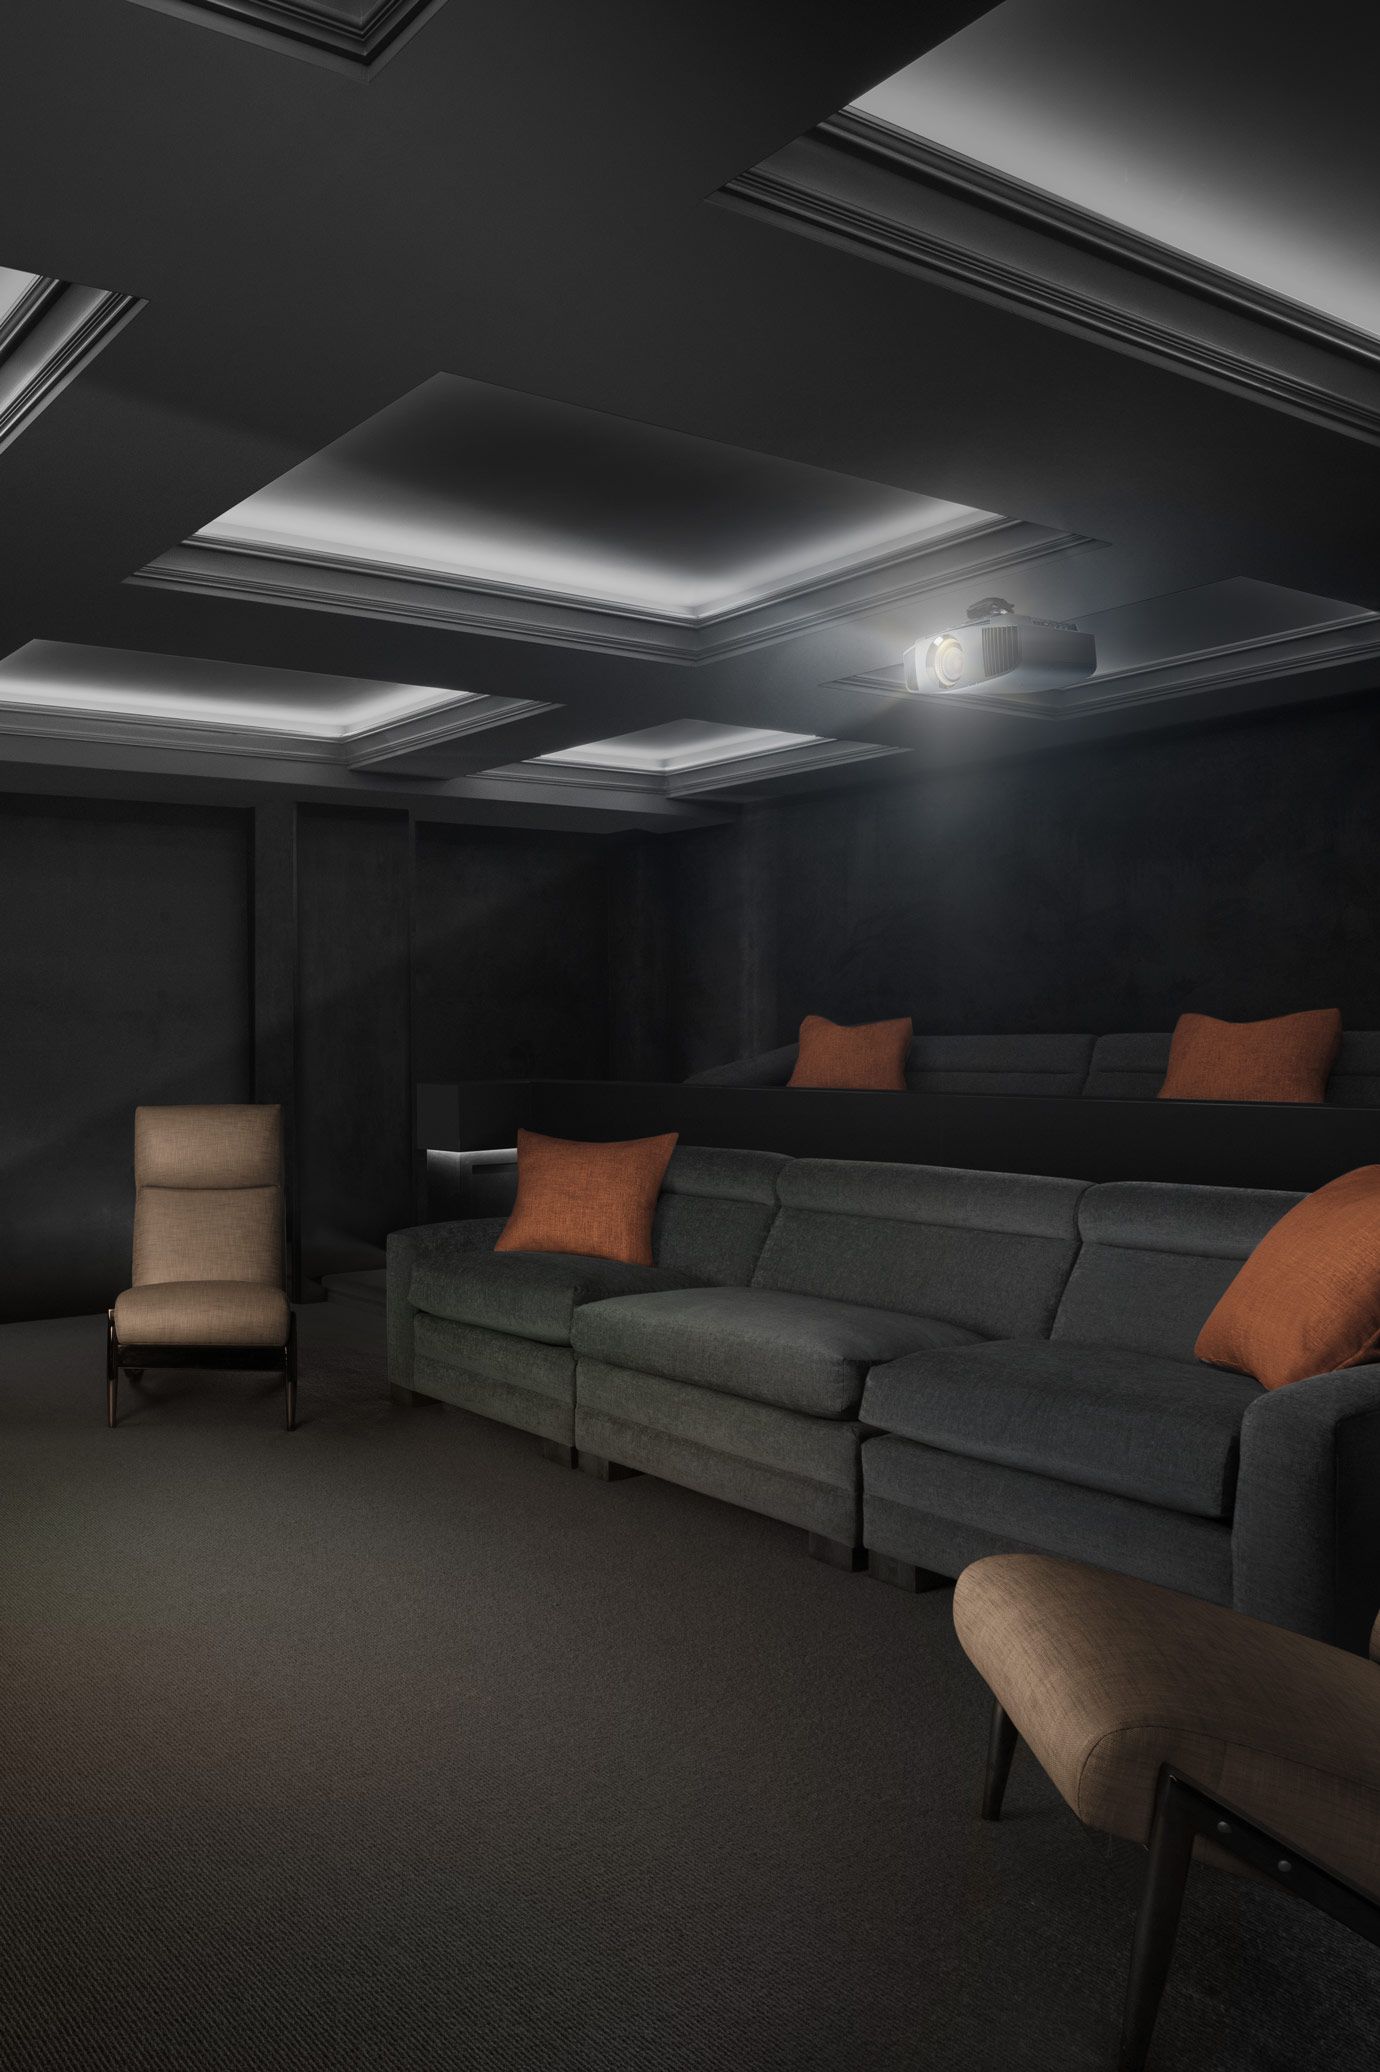 Custom Seating in a home theater with black leather chairs